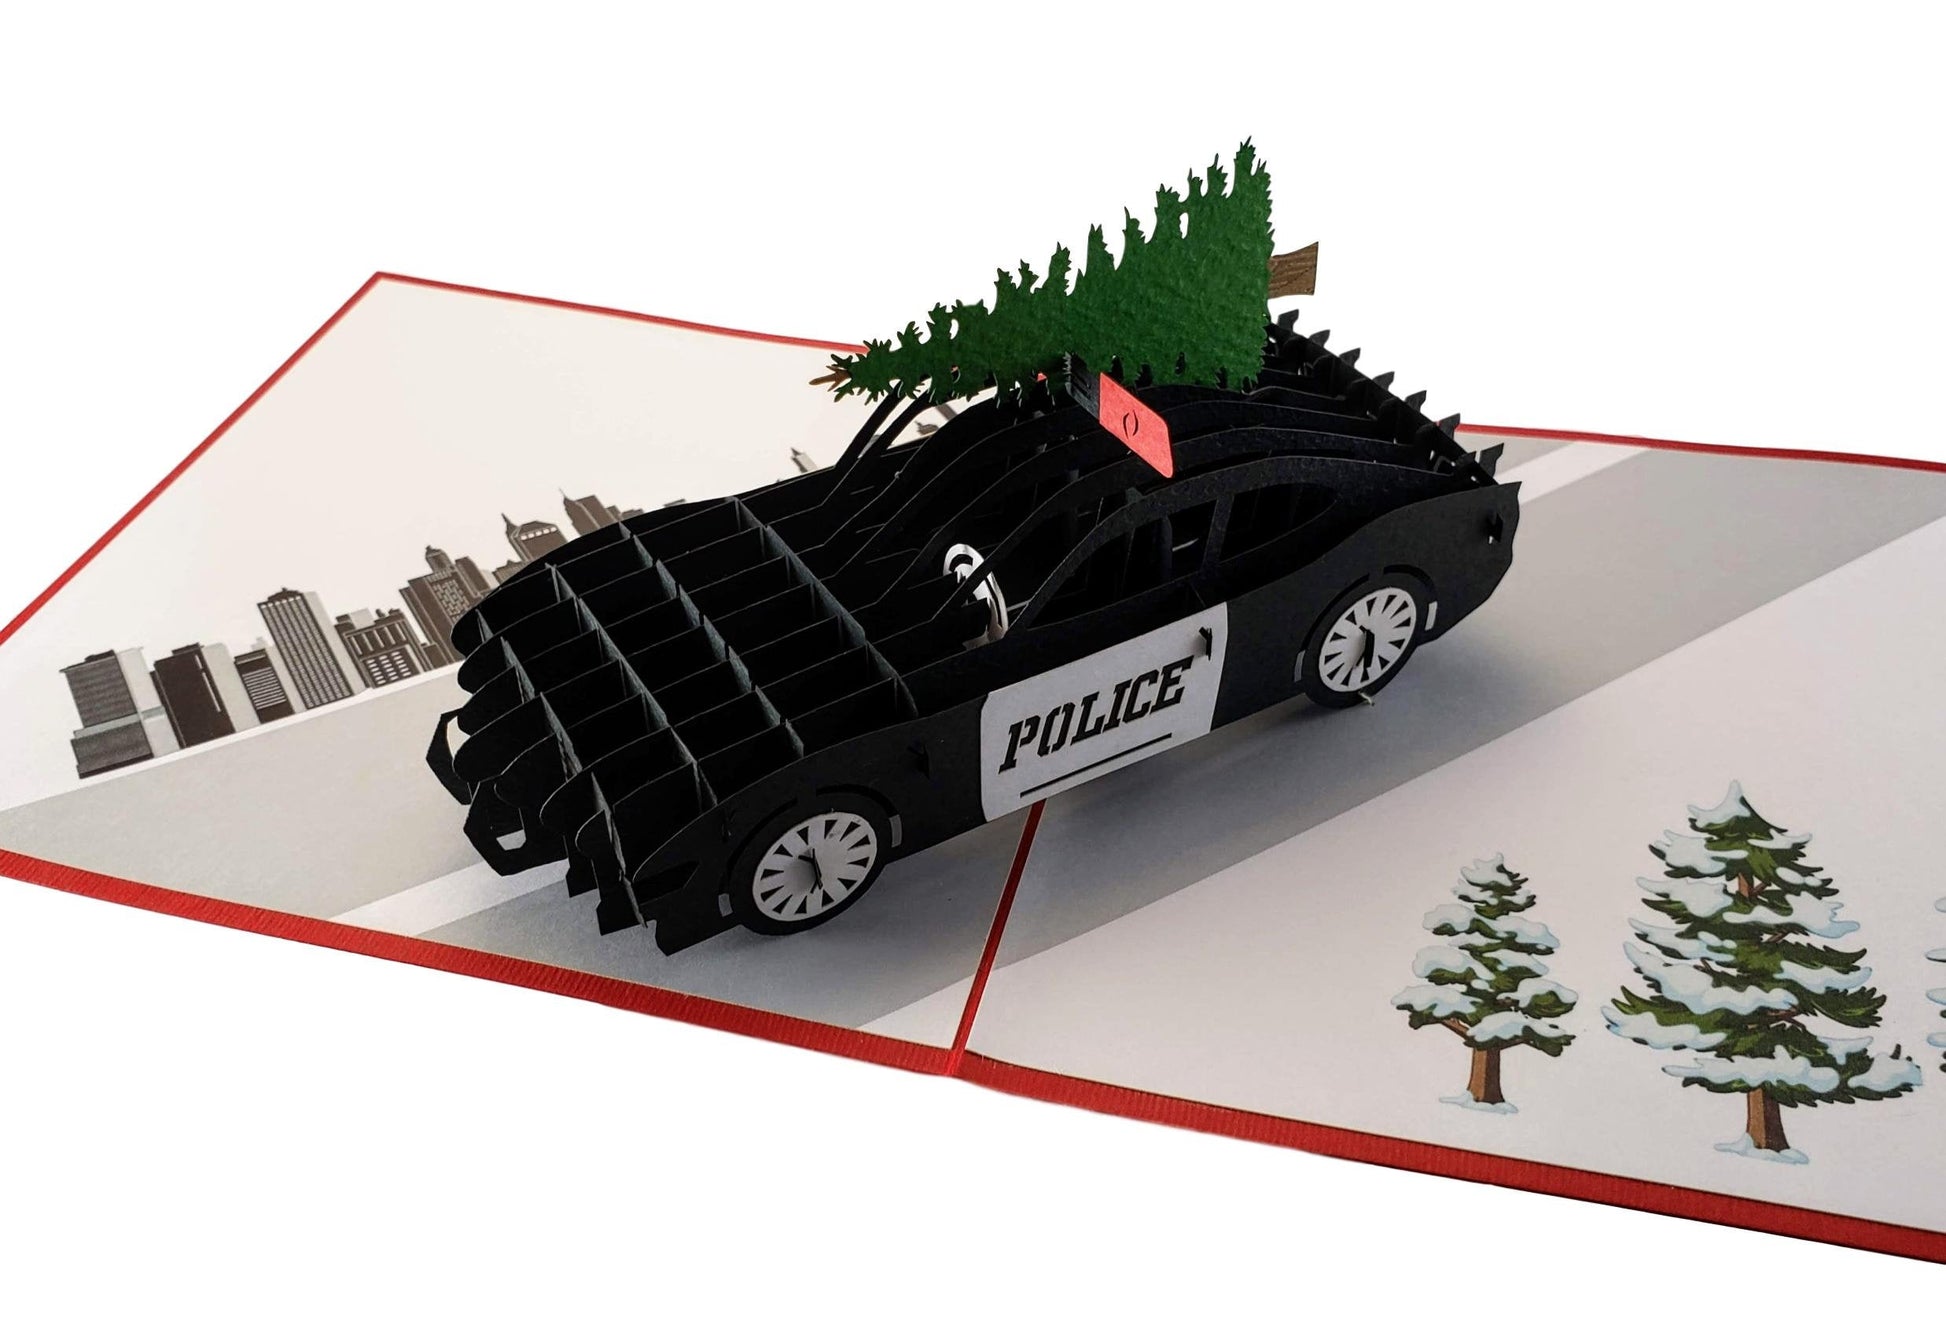 Police Car And Christmas Tree 3D Pop Up Greeting Card - Christmas - iGifts And Cards